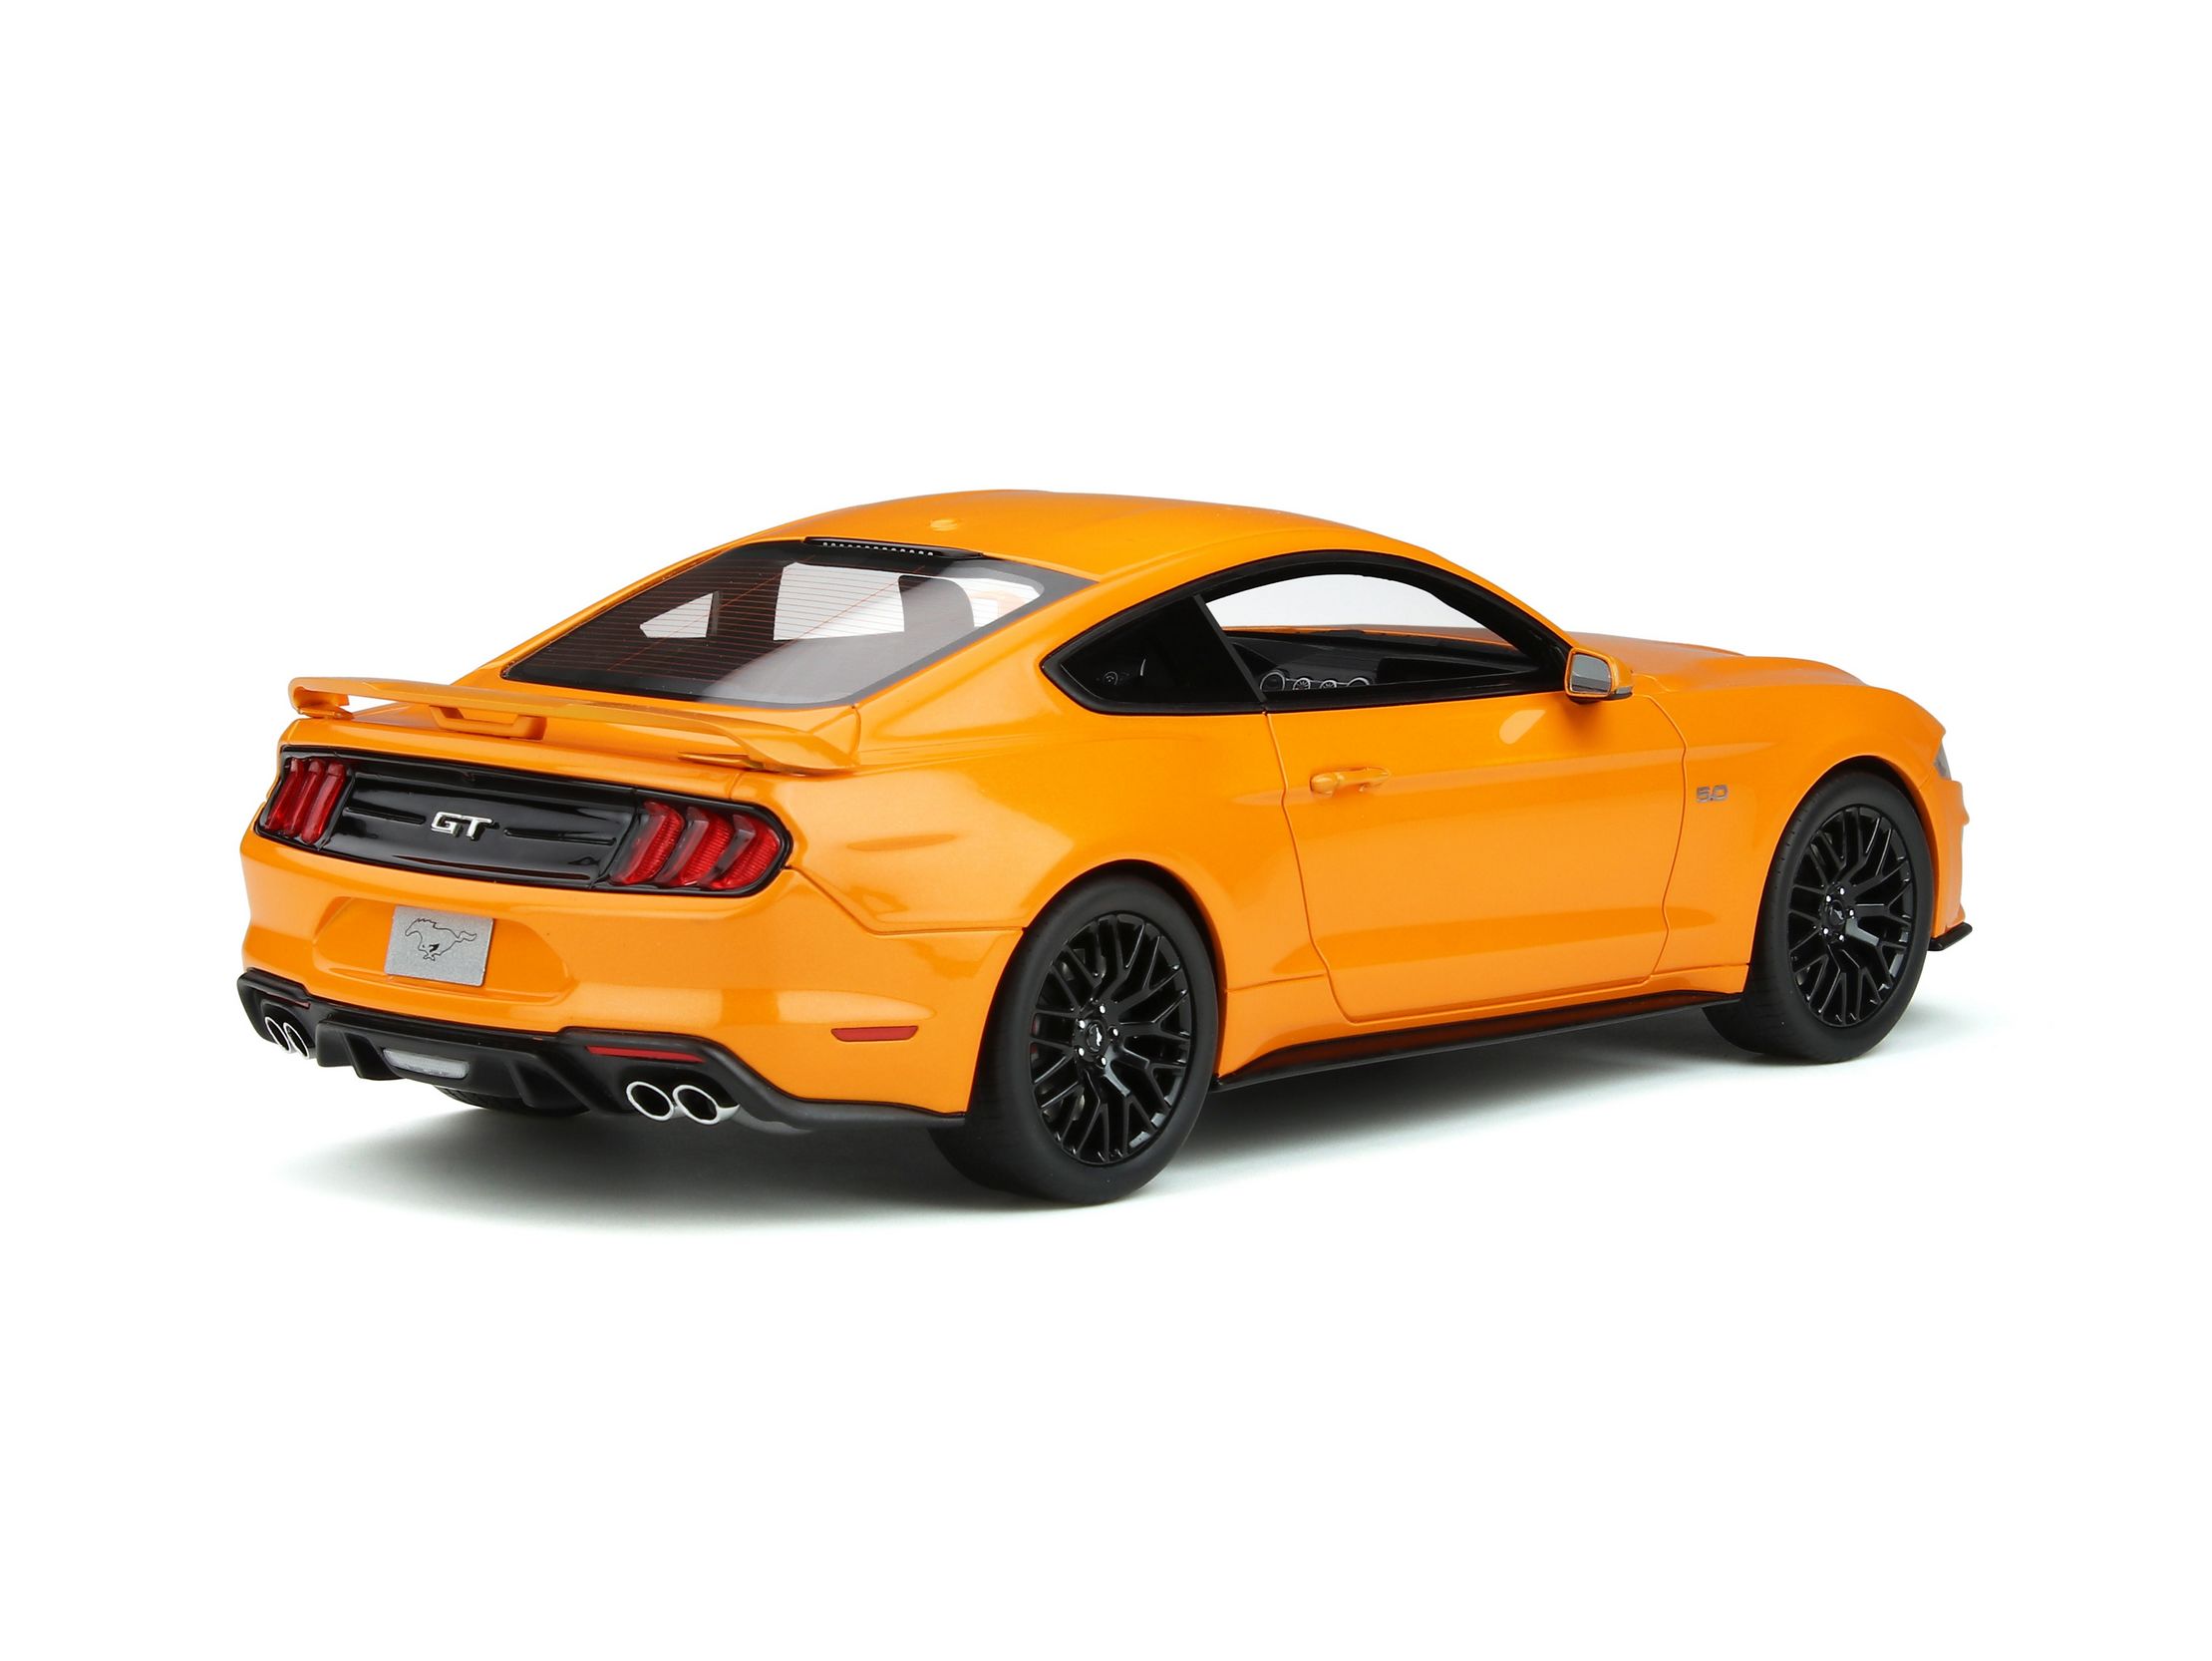 ford mustang 2018 miniature